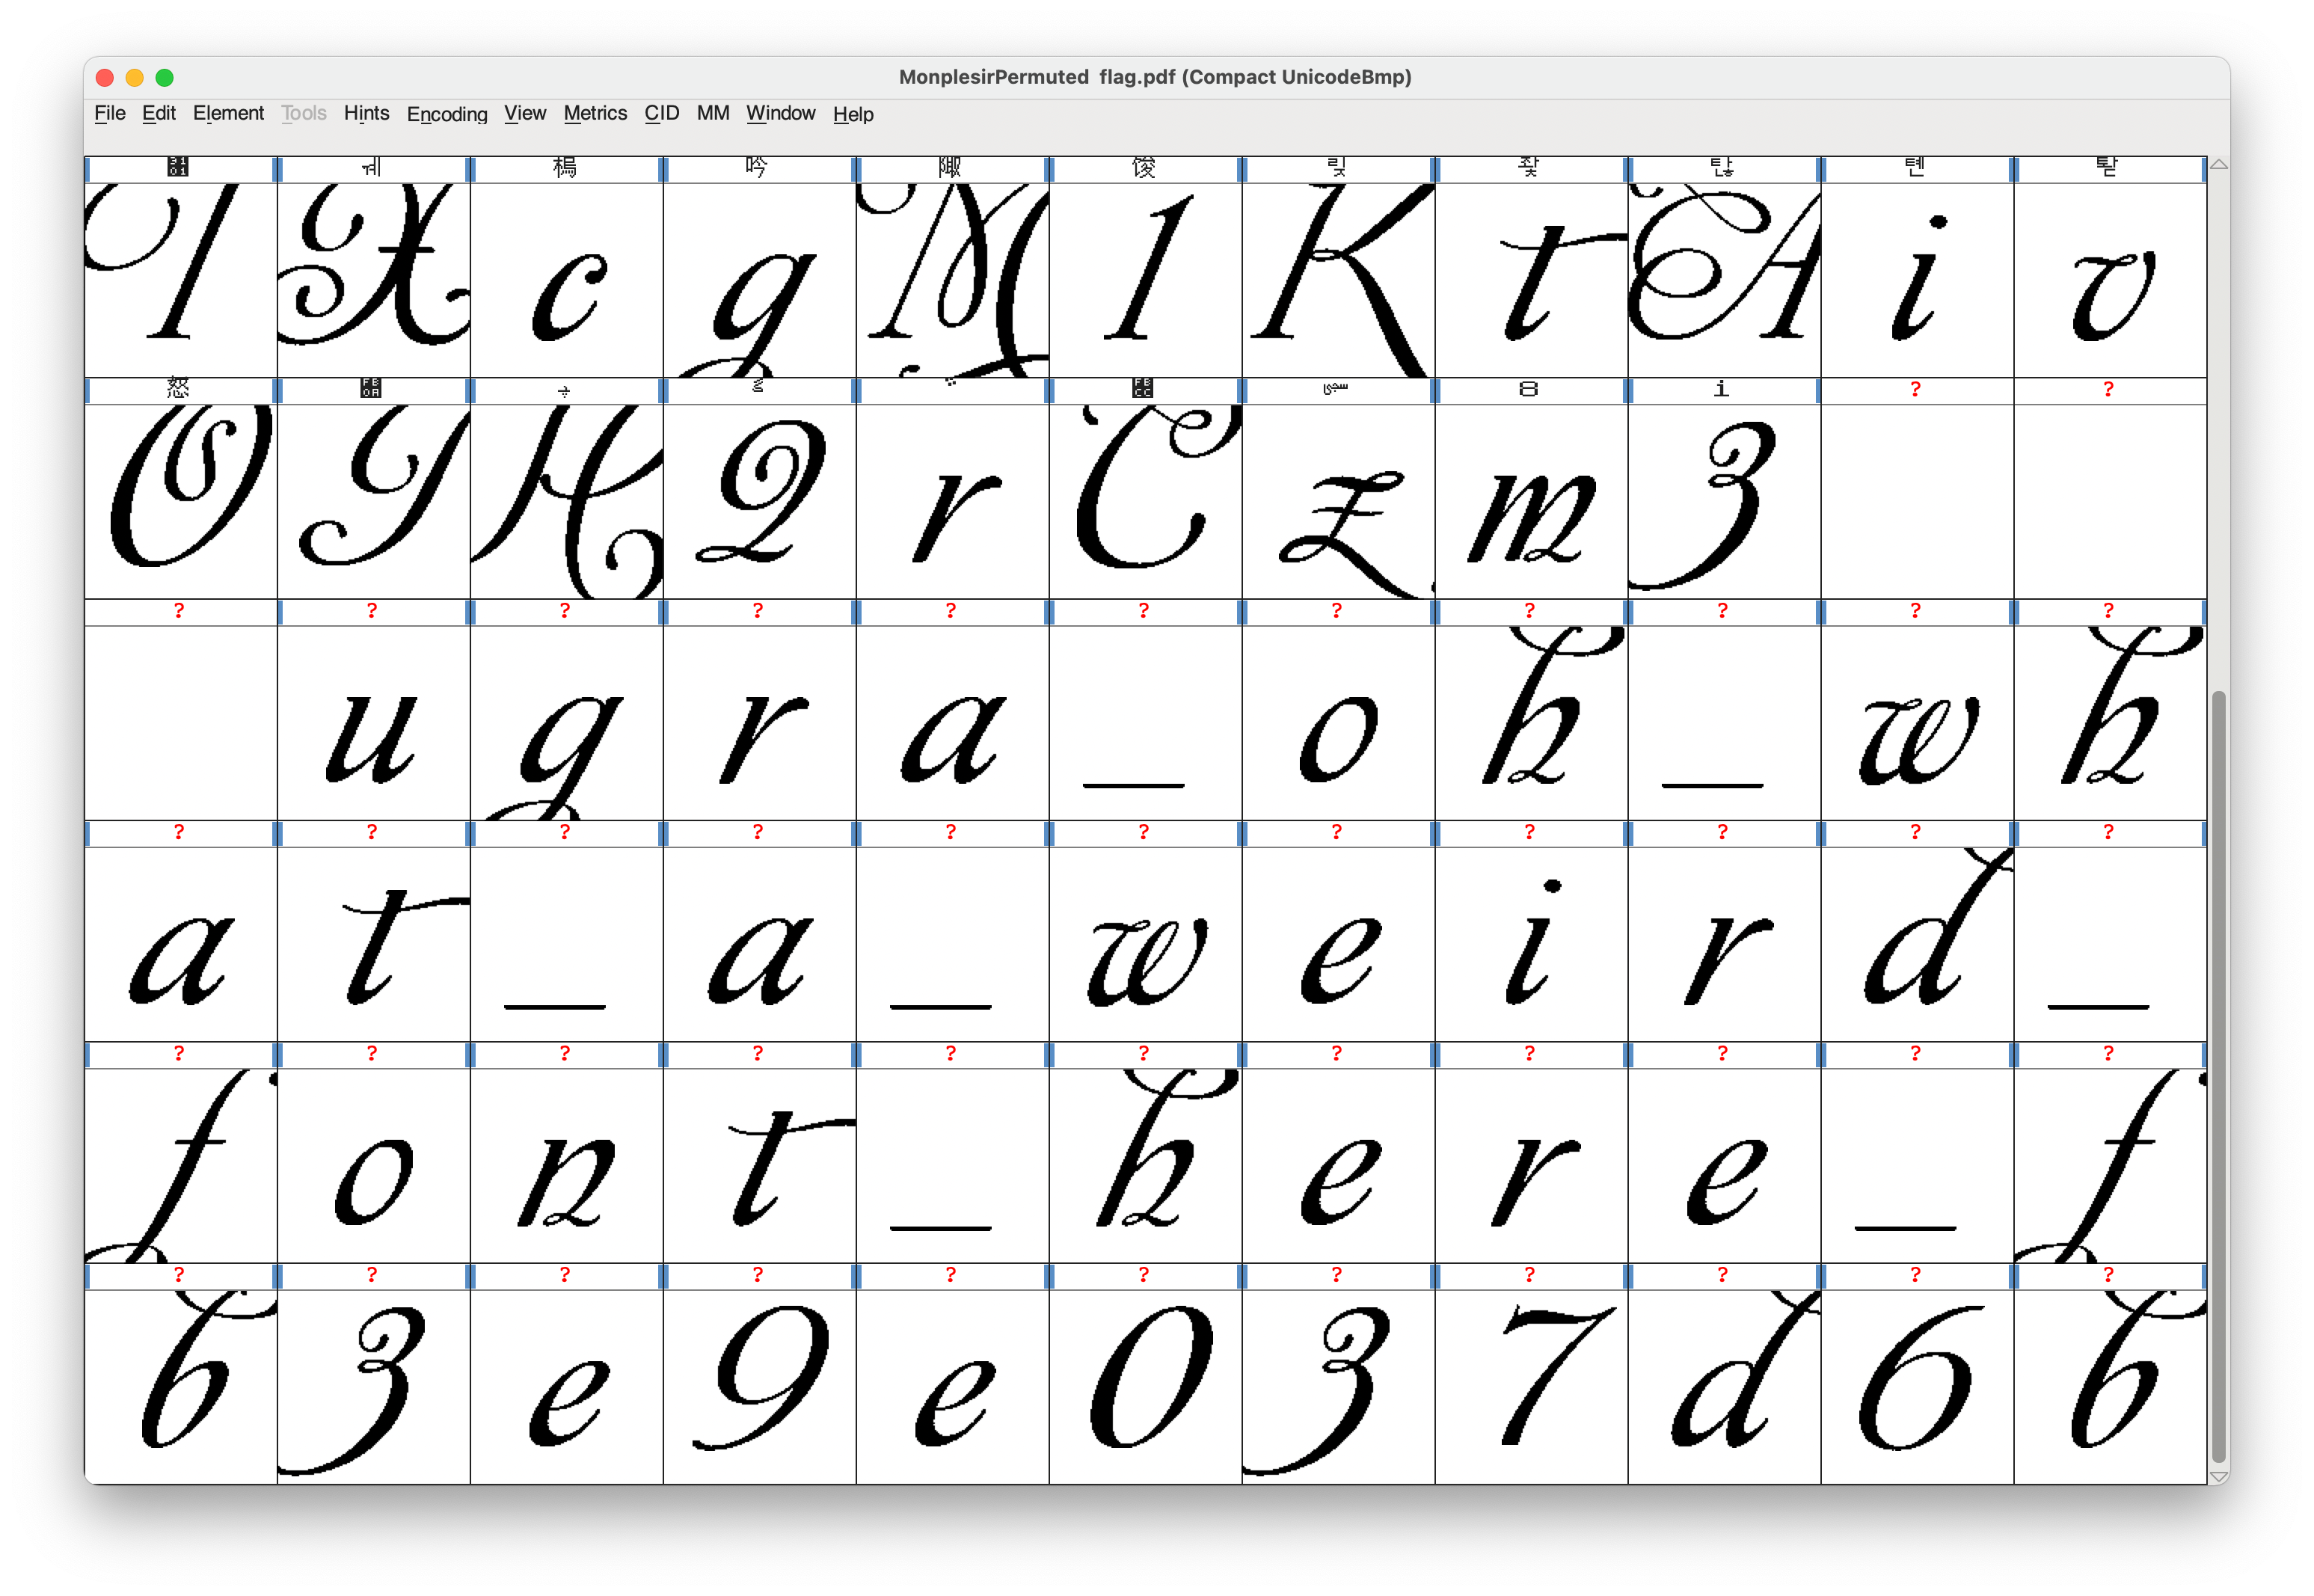 Second half of the font extracted from the PDF with FontForge